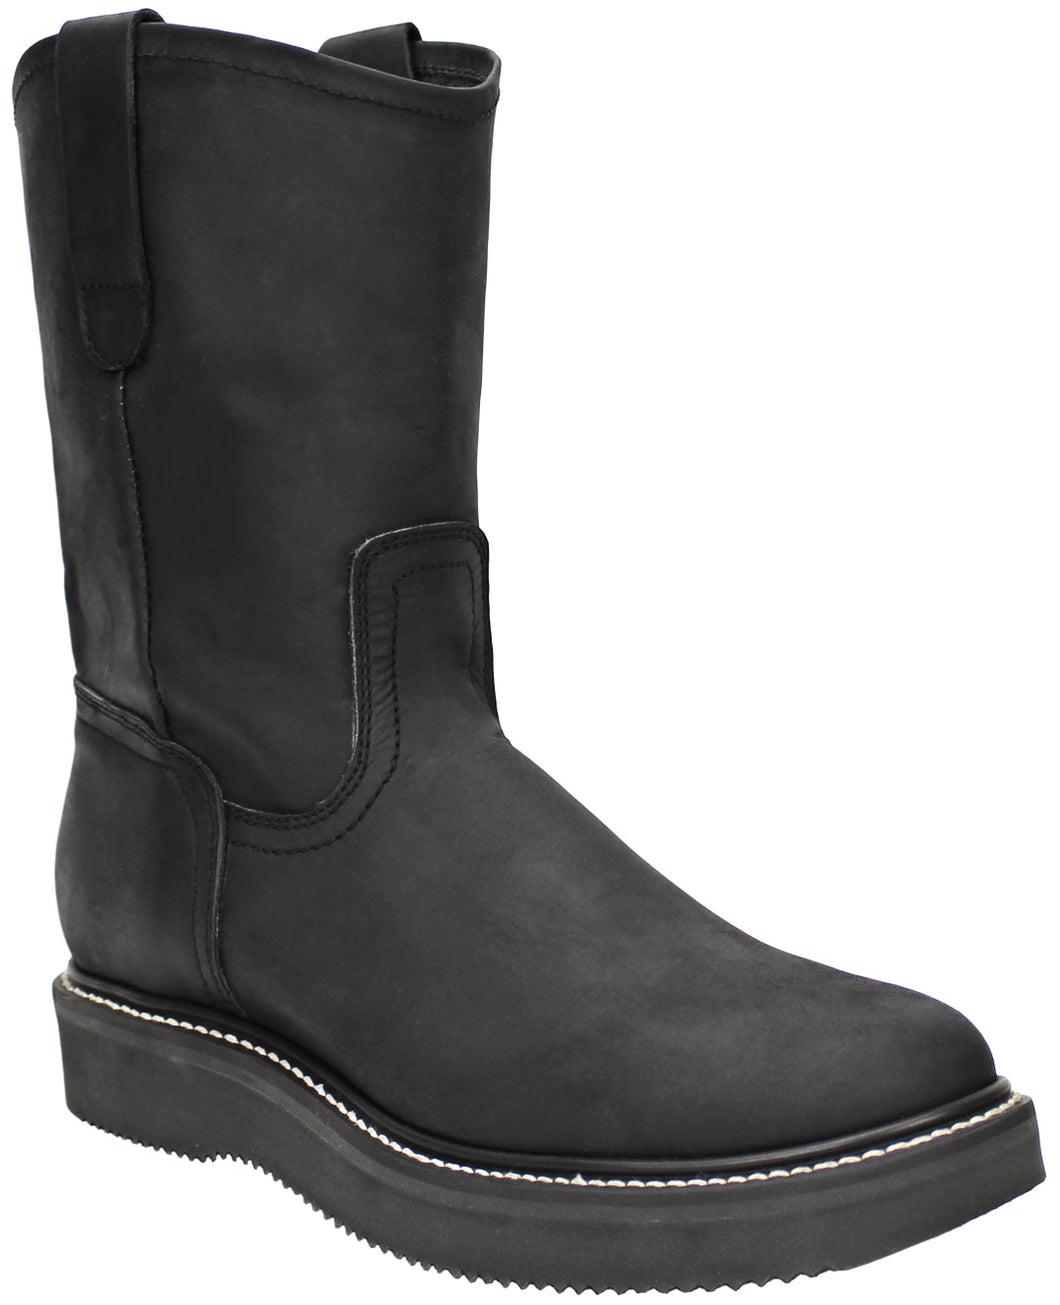 Silverton Greenfield All Leather Work Boot (Black)